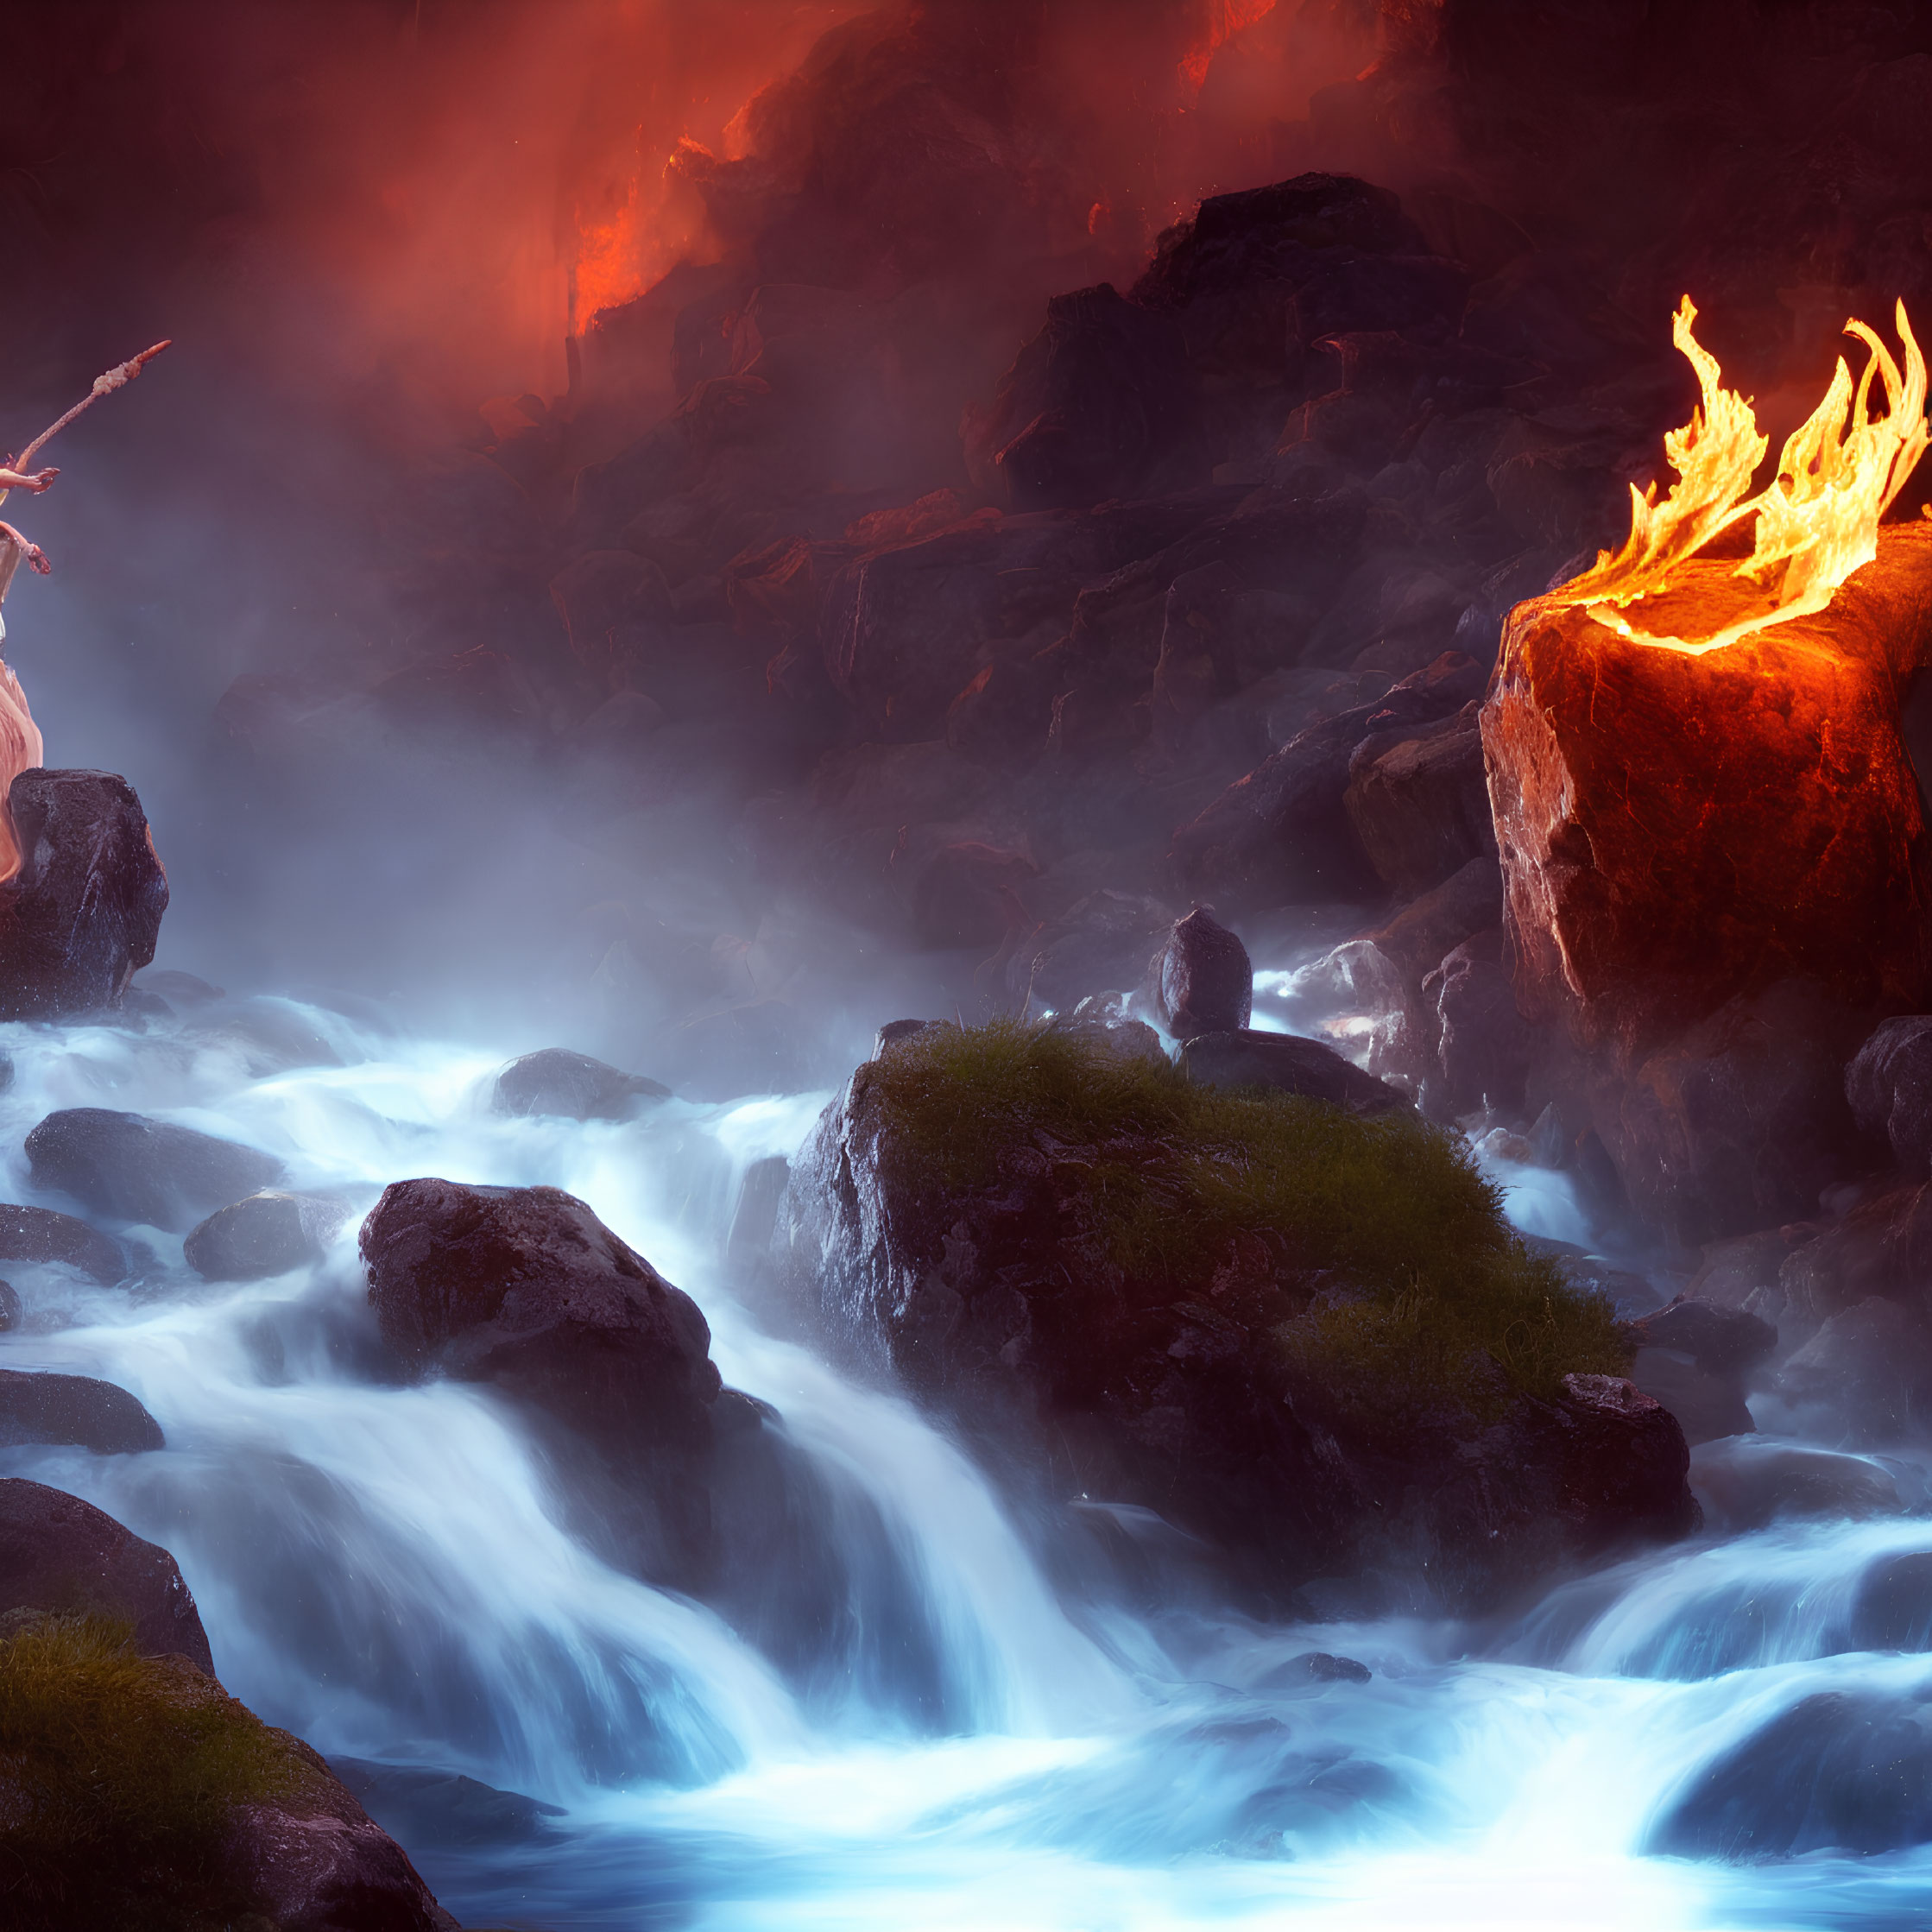 Vibrant blue river in surreal landscape with glowing flame and misty rocks